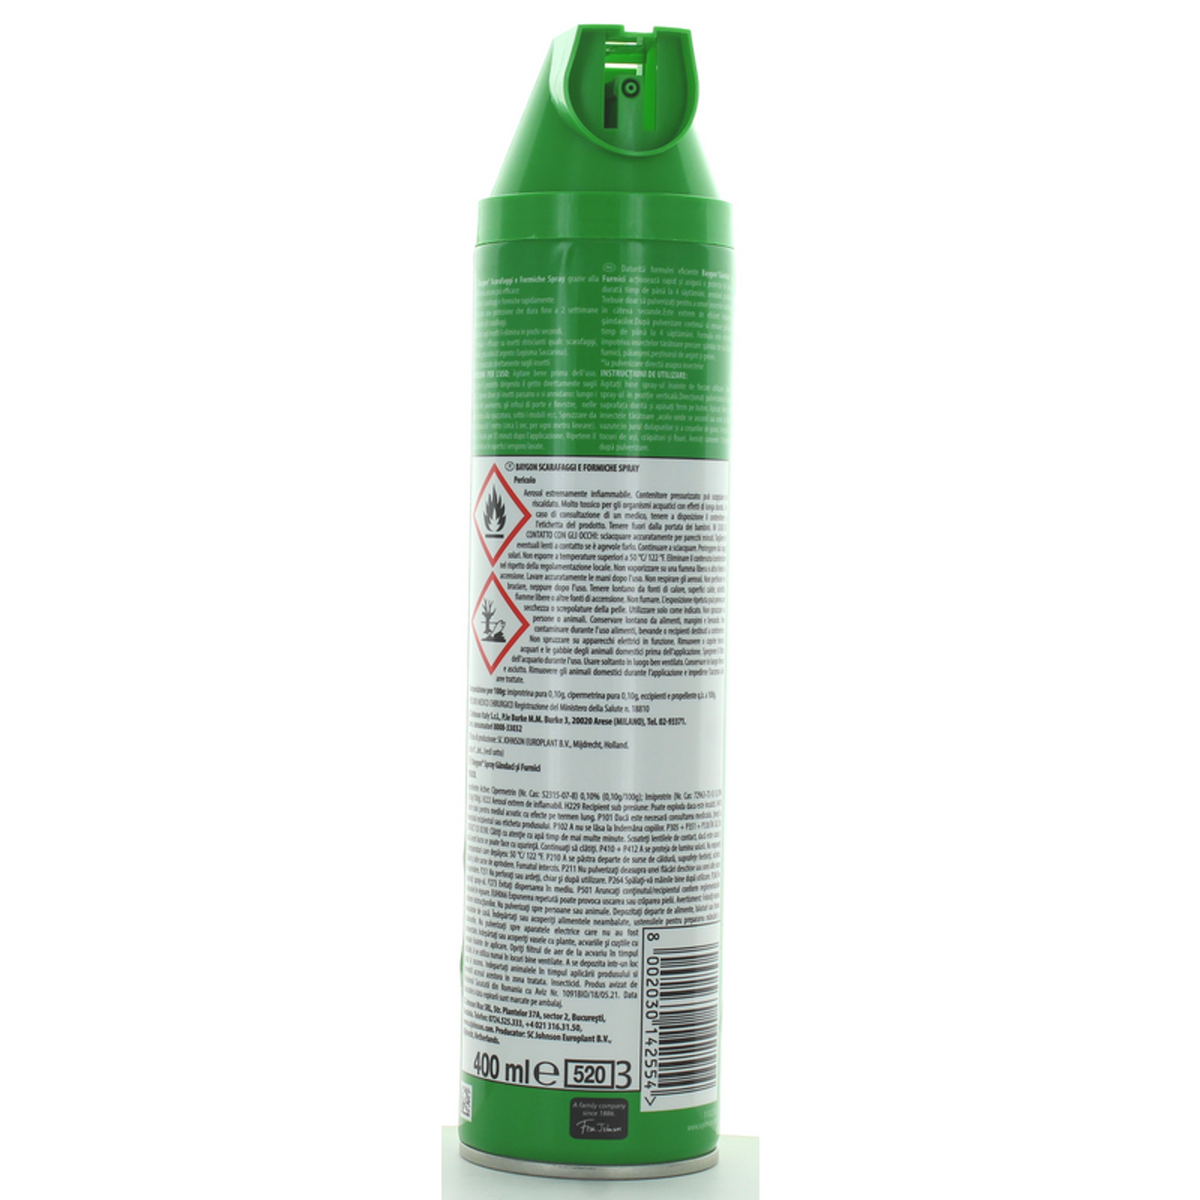 Baygon Green Insecticcide Spray Šváby a mravce 400 ml